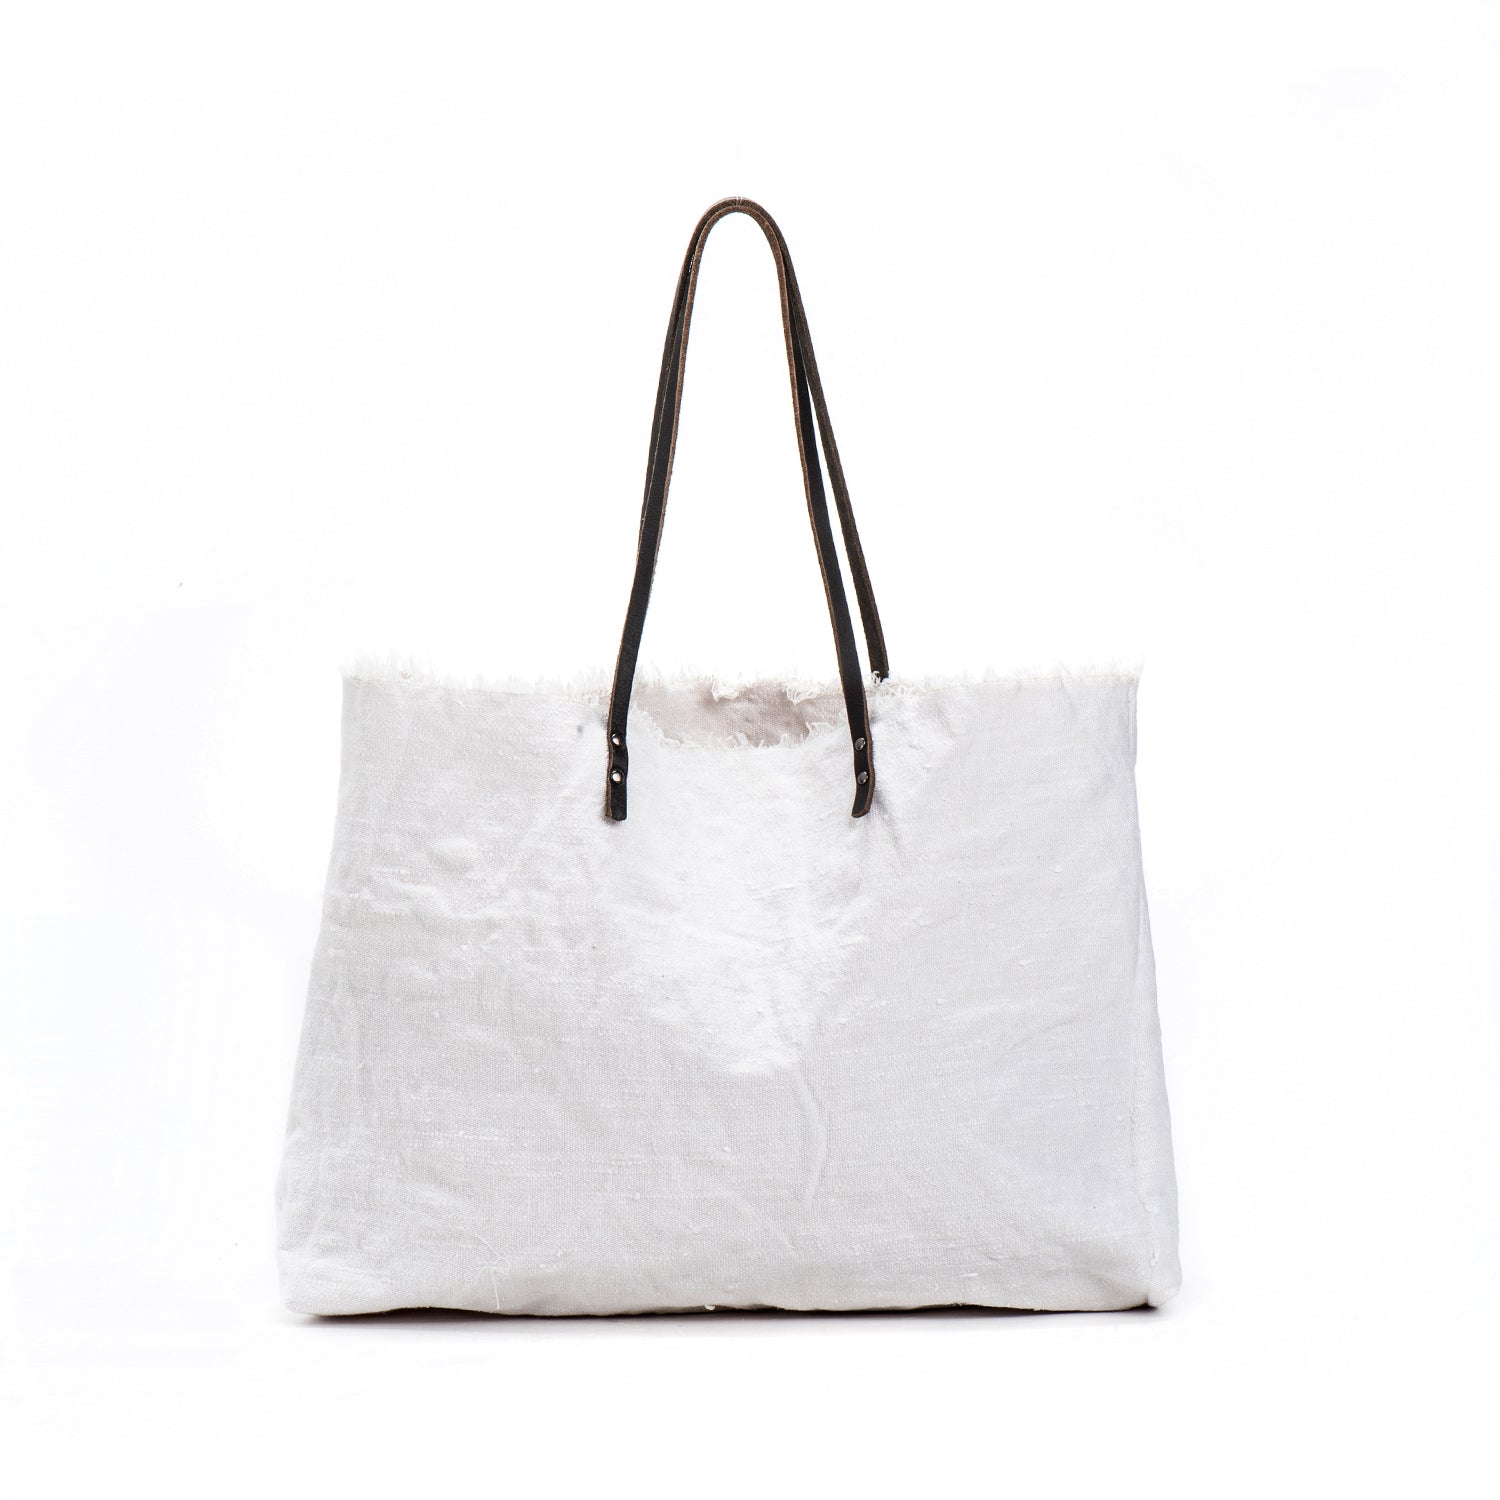 Hermès Garden Party White Canvas Tote Bag (Pre-Owned)